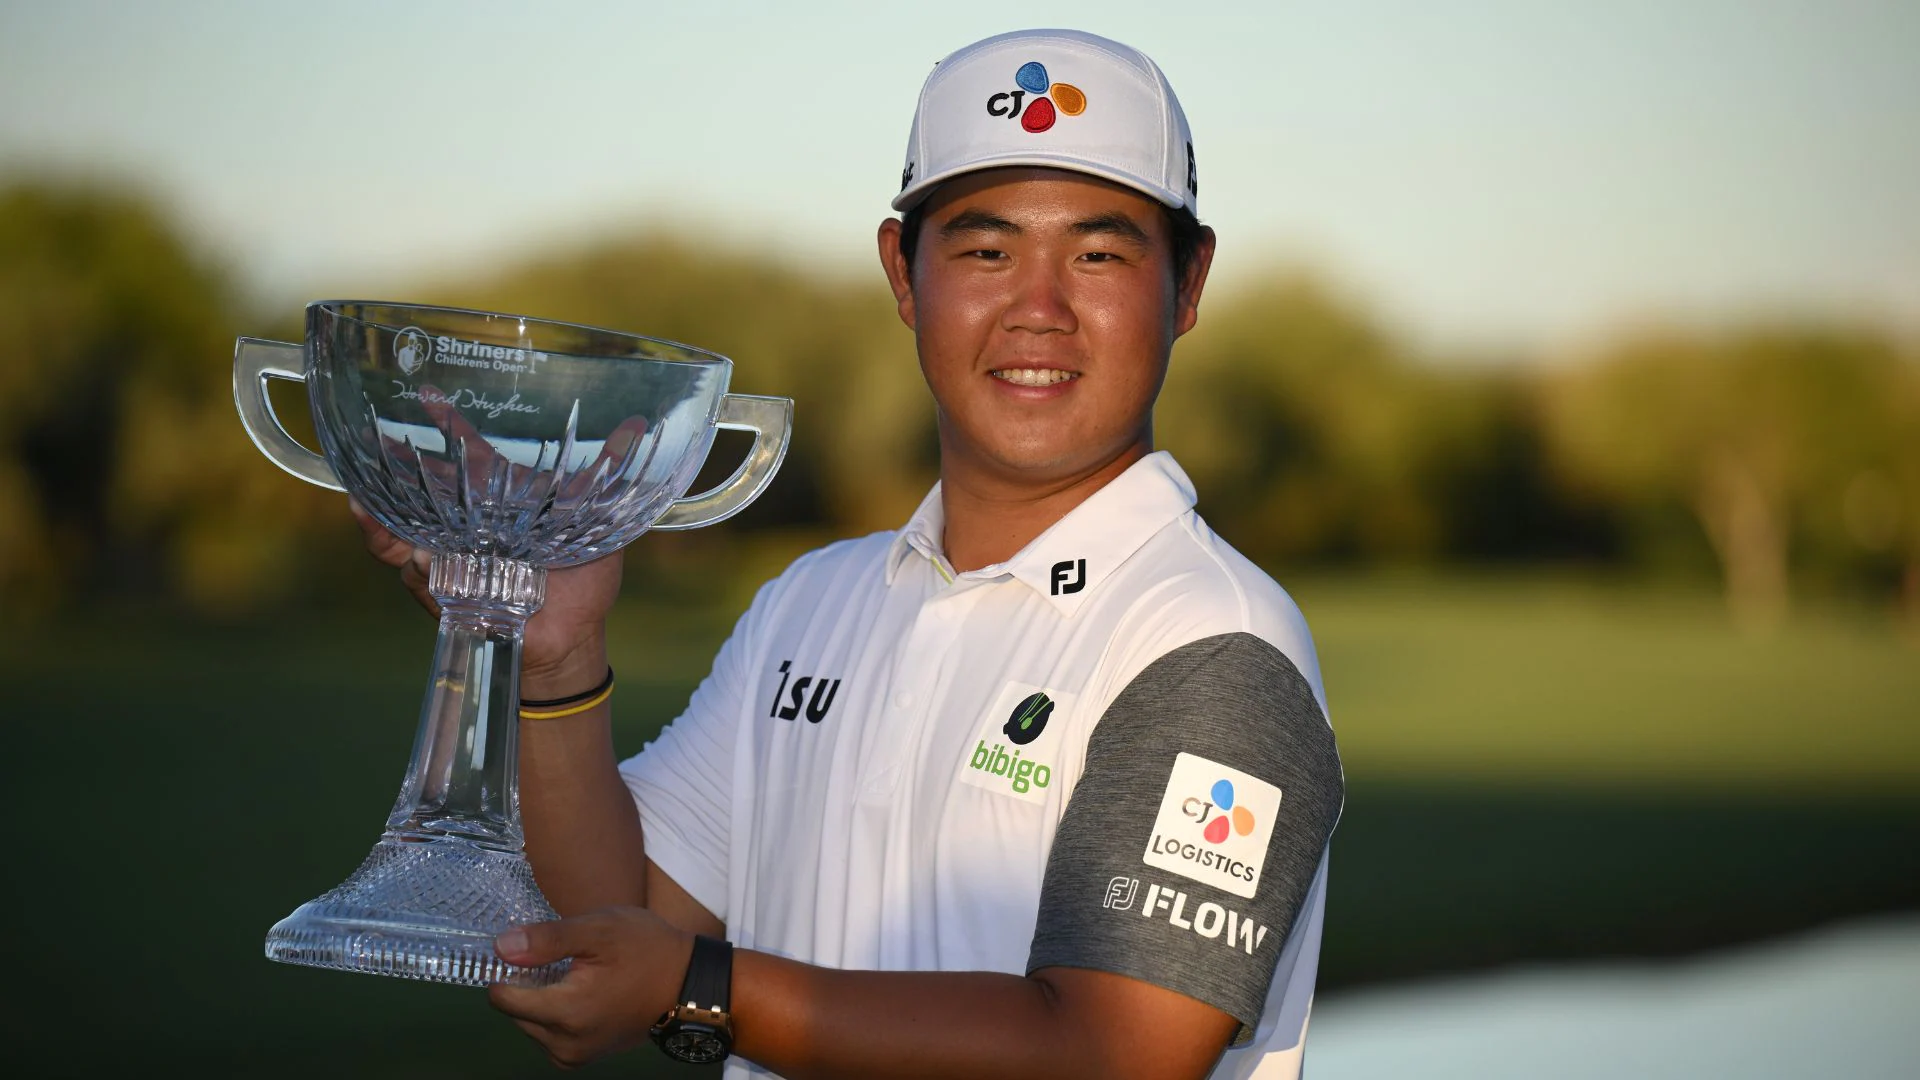 After Patrick Cantlay’s triple on No. 18, Tom Kim wins Shriners Children’s Open